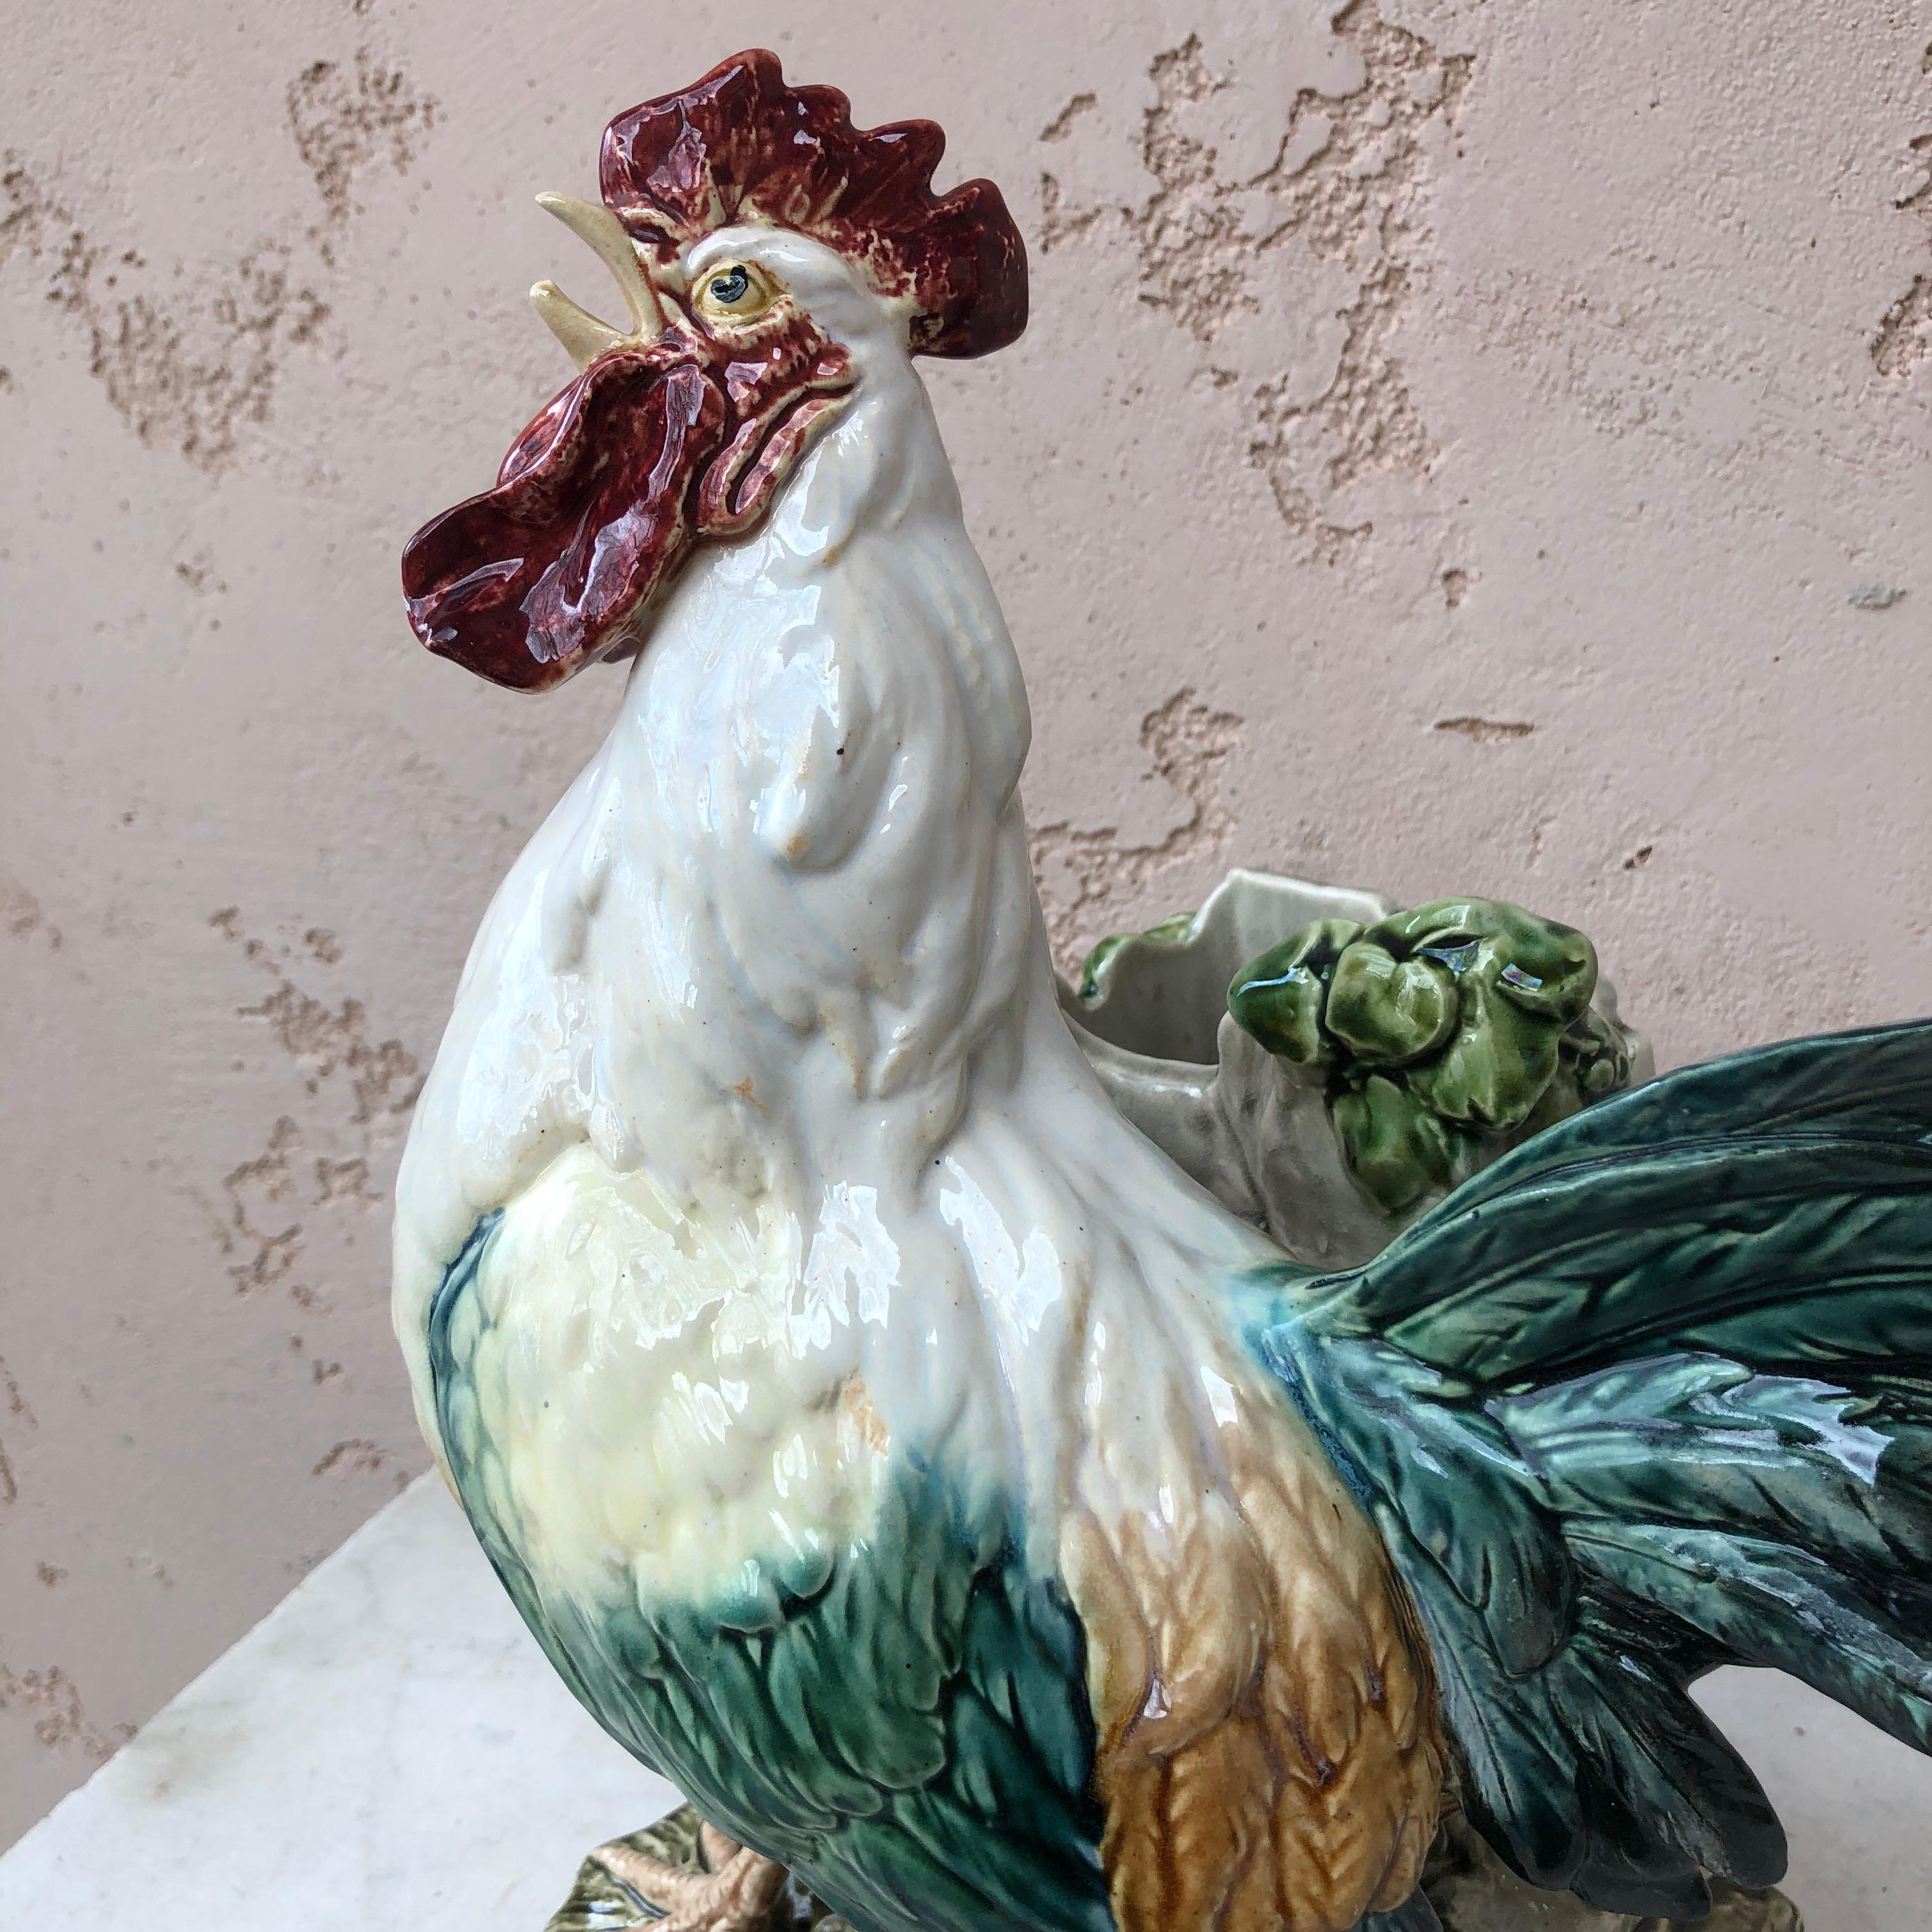 C.1890 Majolica Rooster Vase Choisy Le Roi by Carrier Belleuse For Sale 1